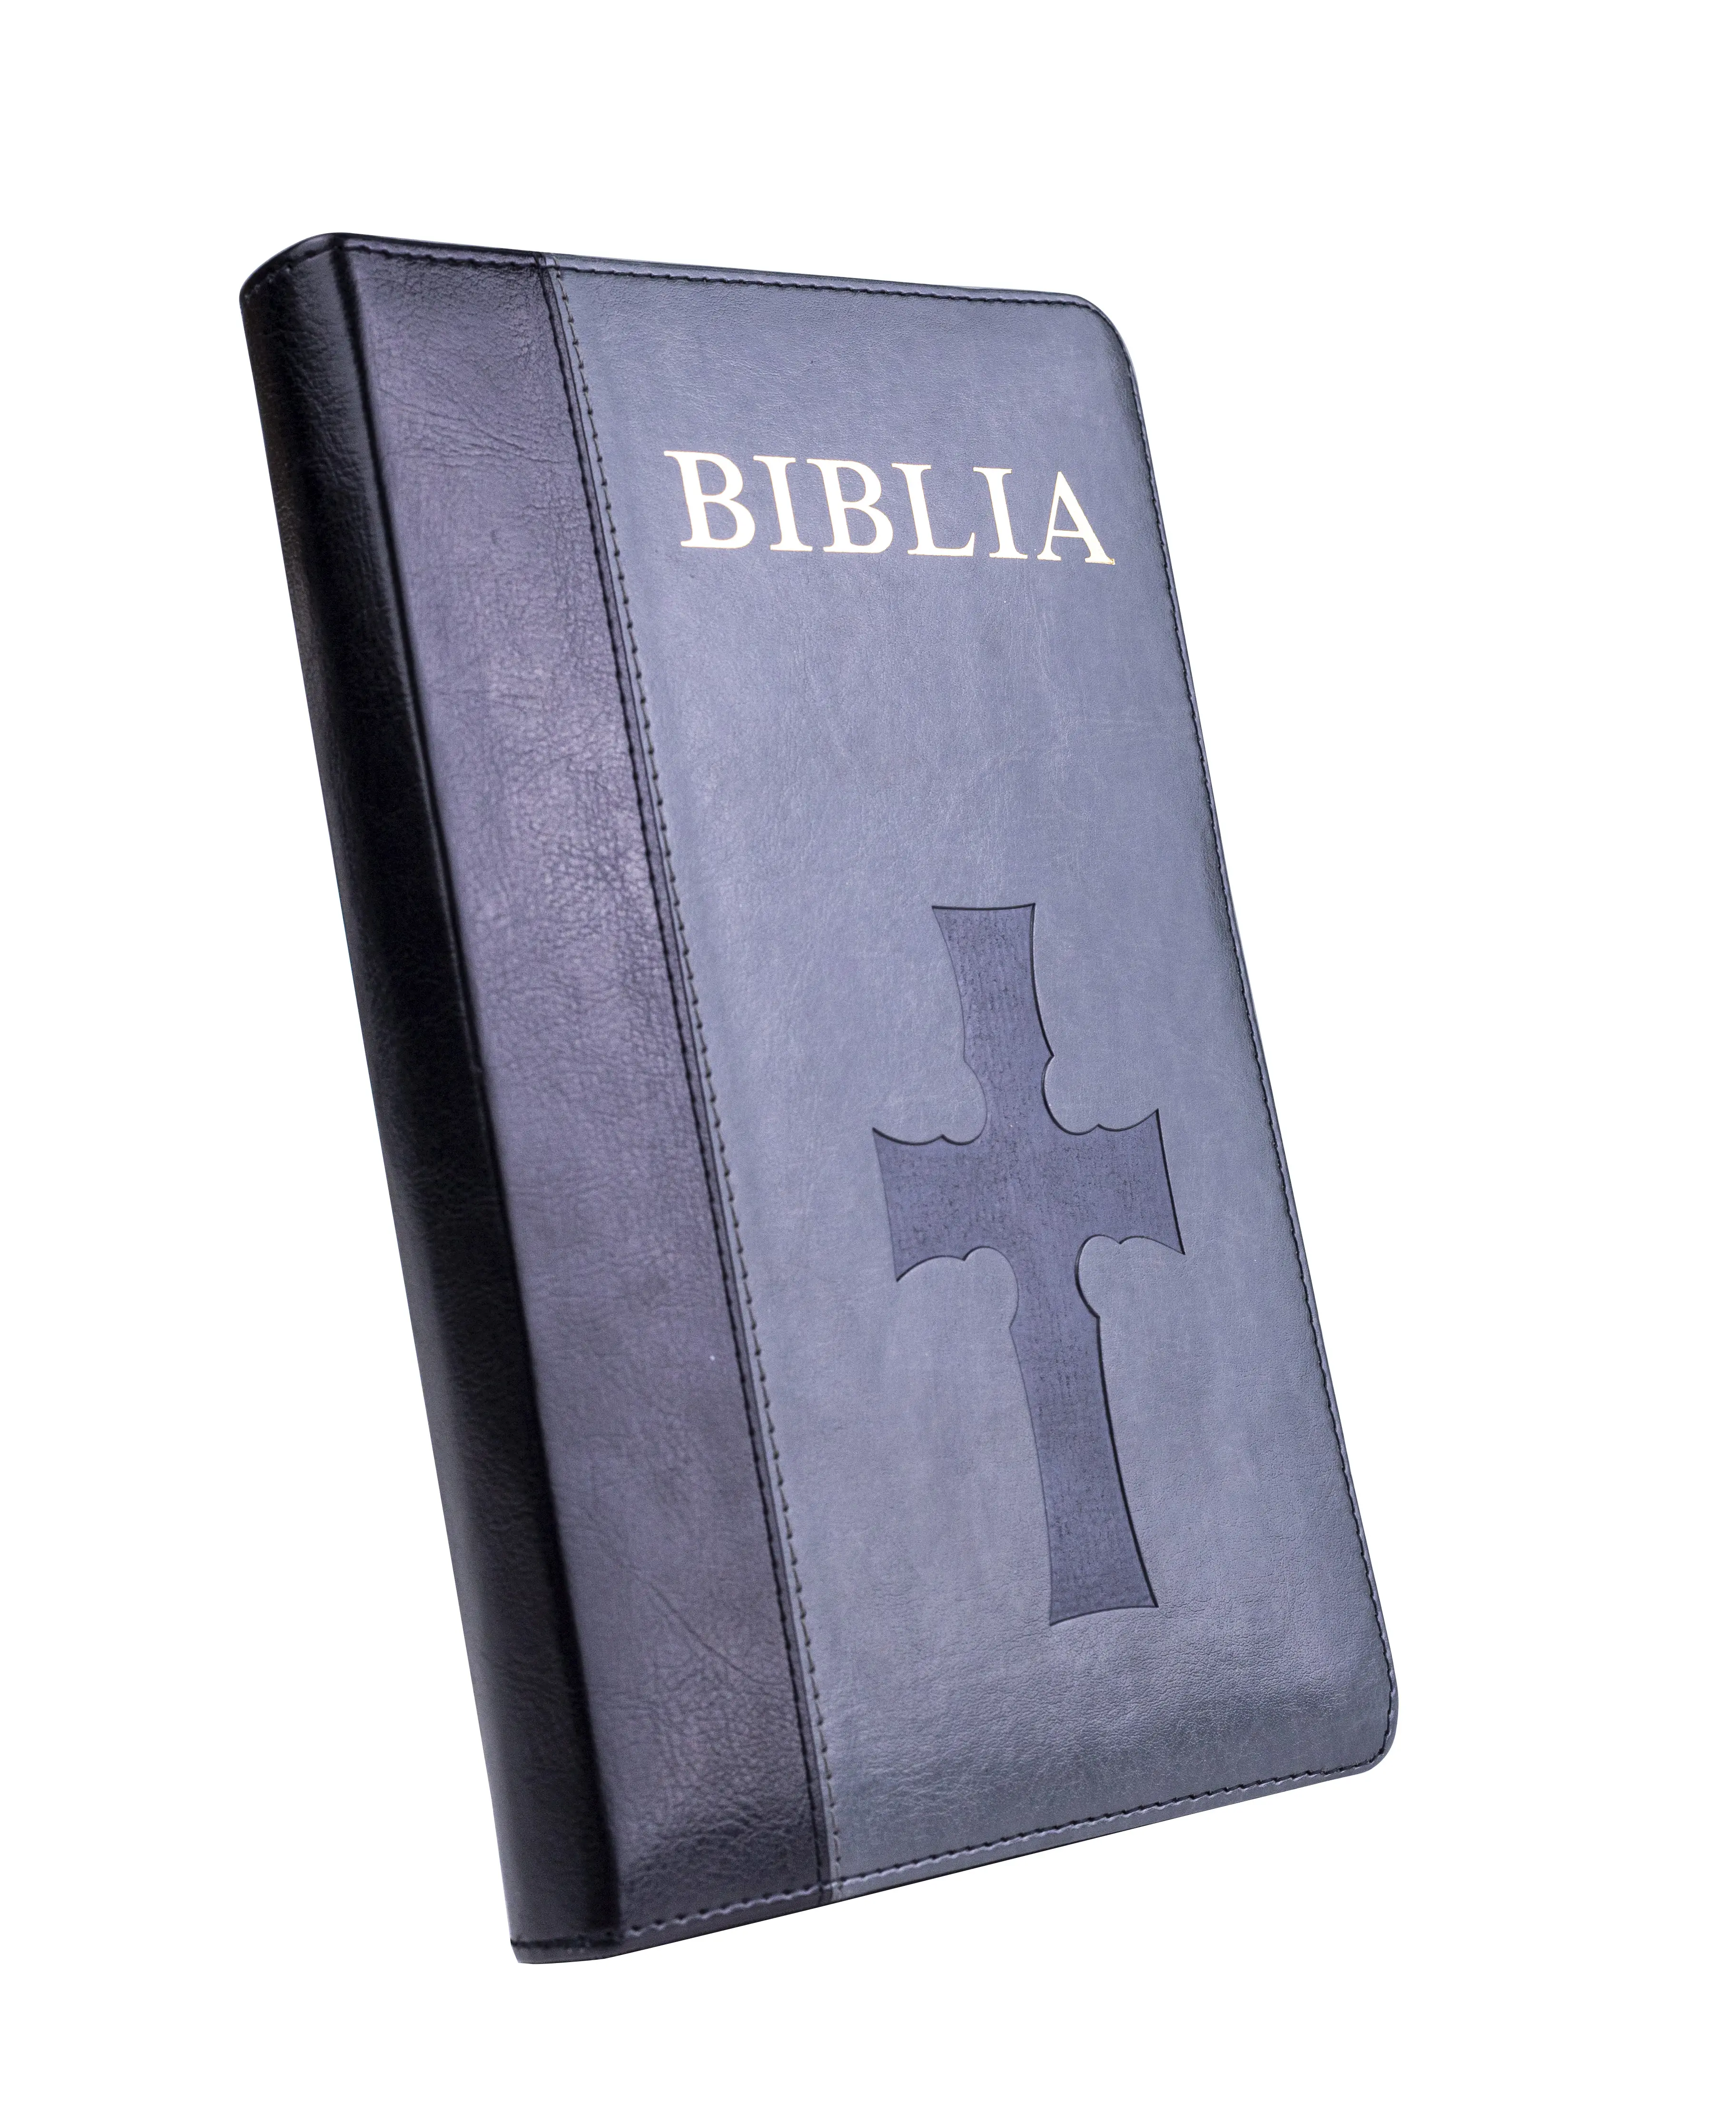 OEM Leather Cover Bible Book Printing Service Large Print Bible